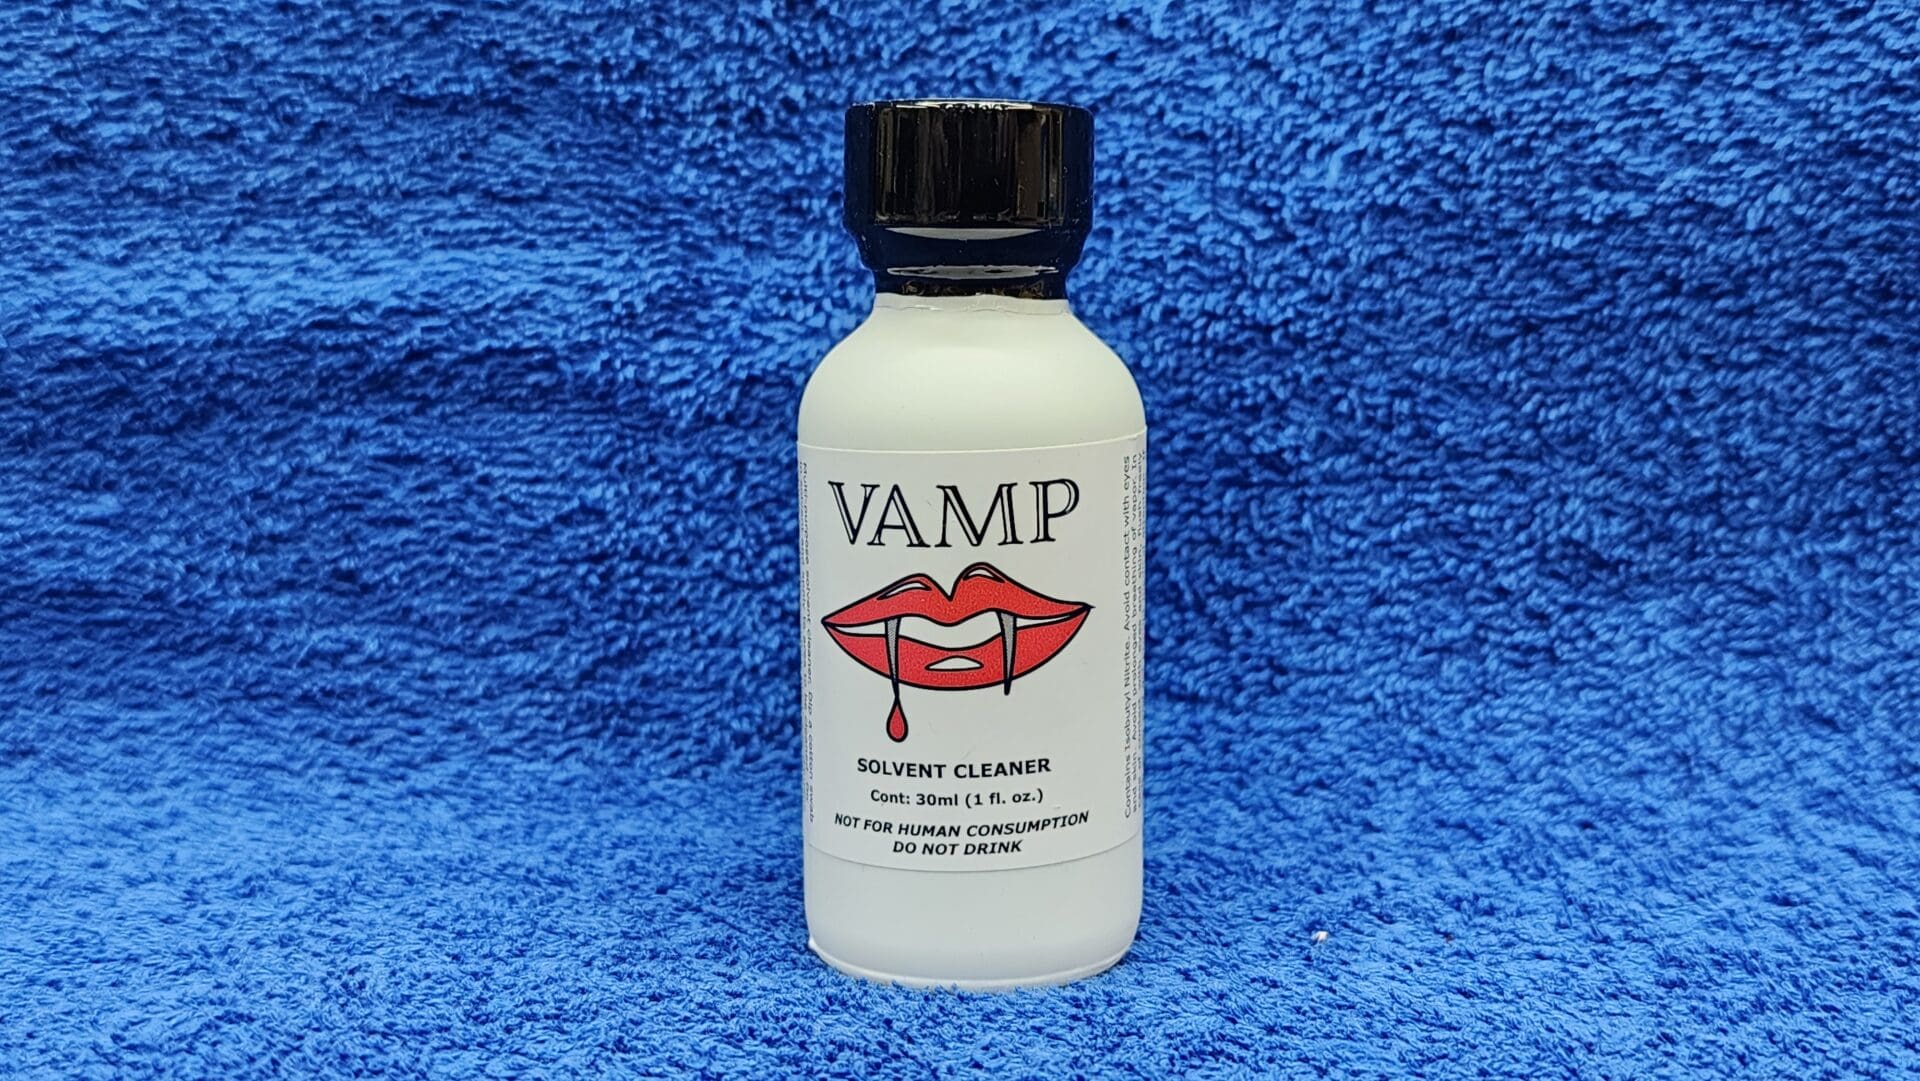 A bottle of Vamp solvent cleaner with a graphic of red lips on a blue towel background.